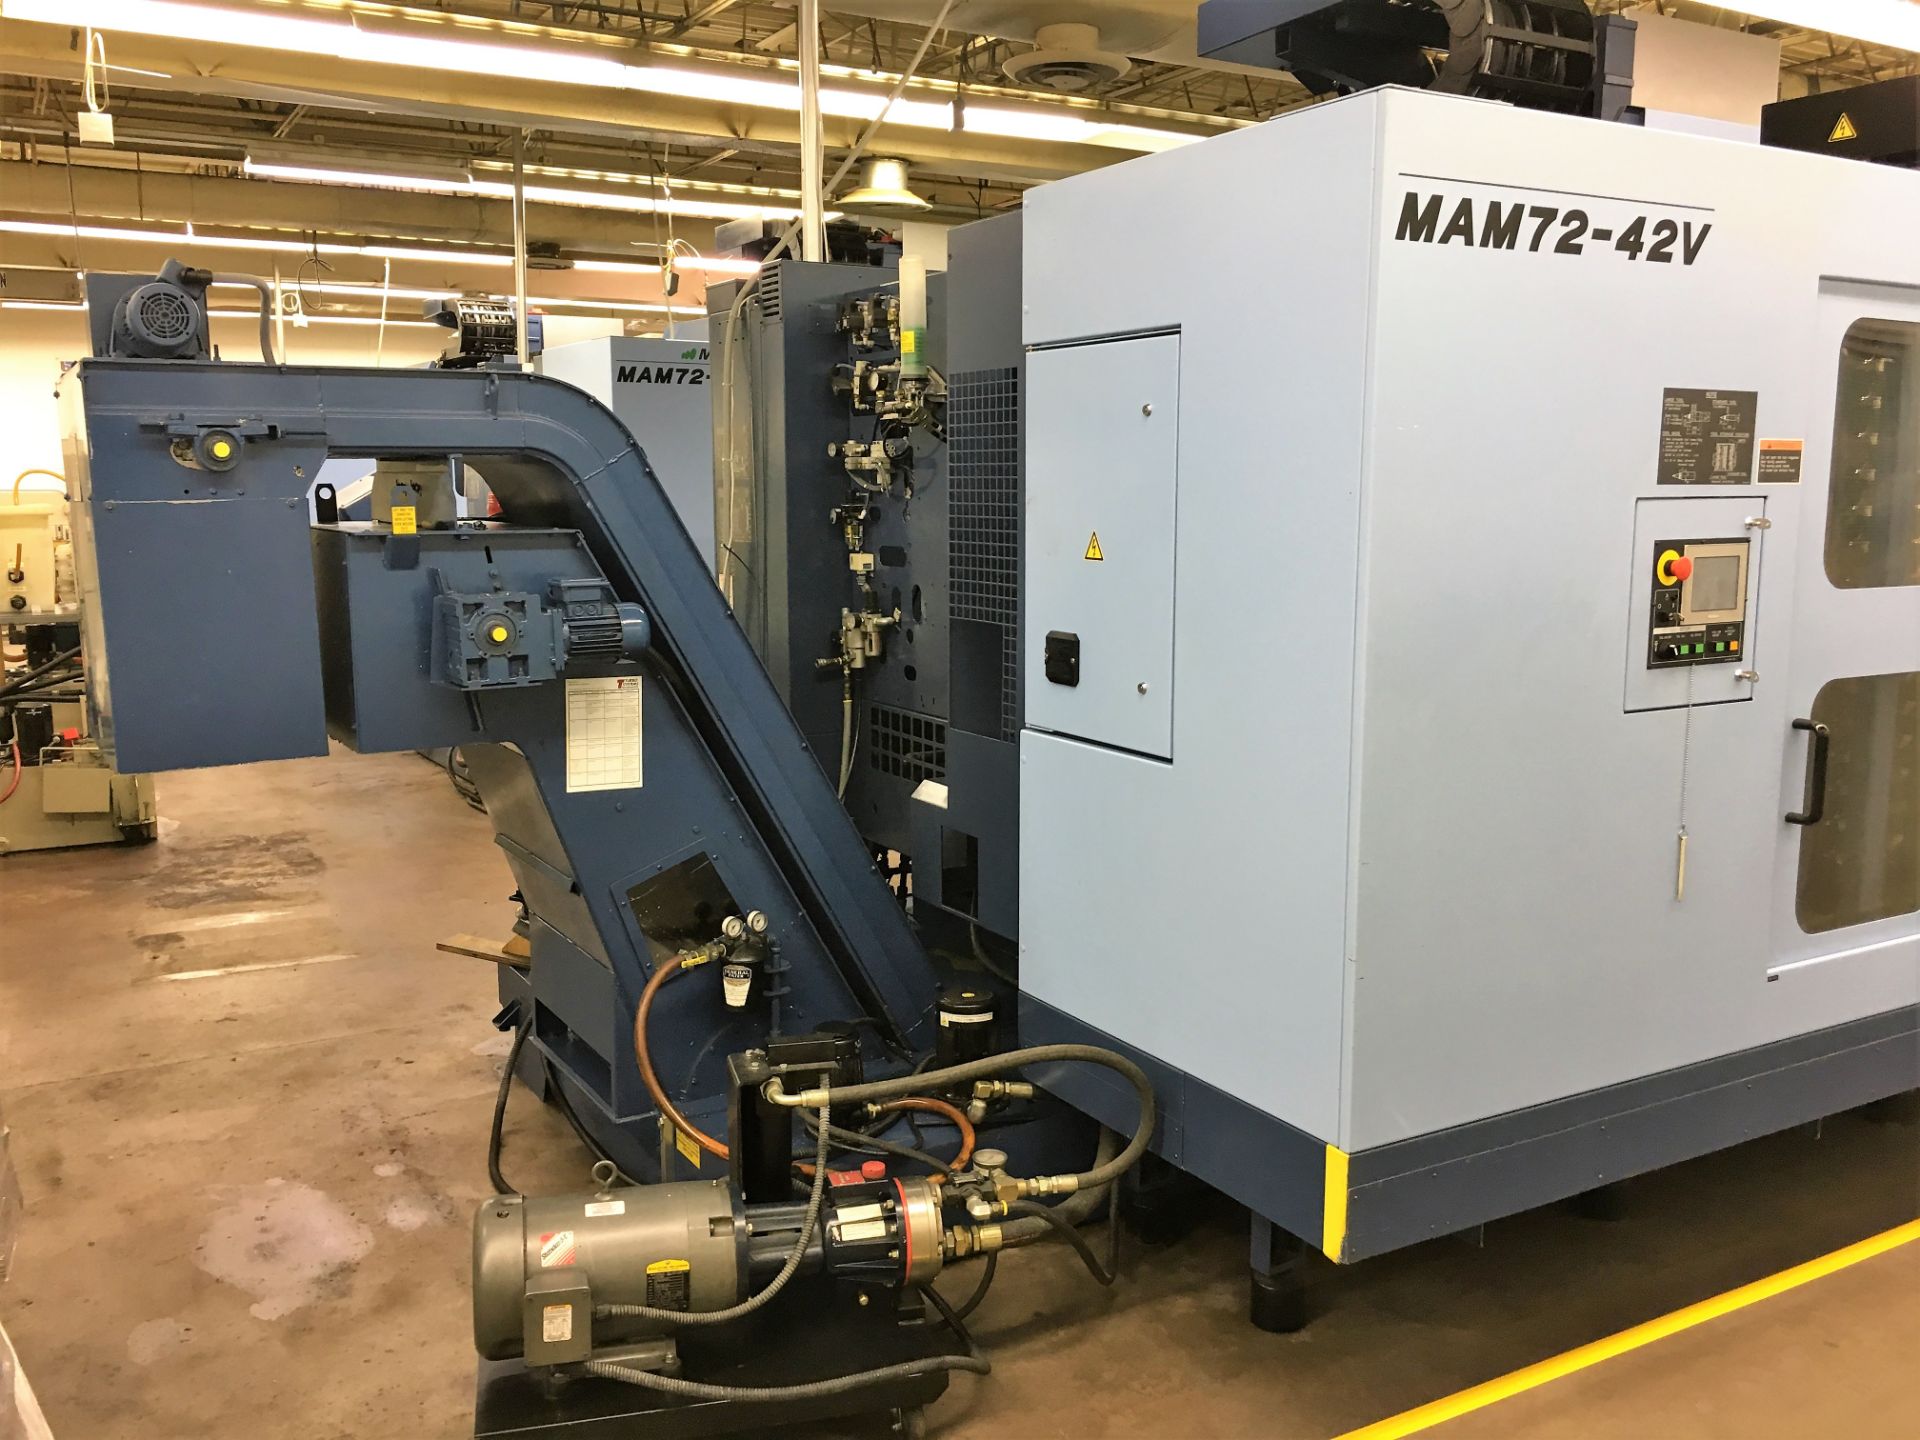 MATSUURA # MAM-72-42V ''TRUNNION-TYPE'' ''FULL-5-AXIS'' CNC VERTICAL MACHINING CENTER WITH - Image 6 of 7